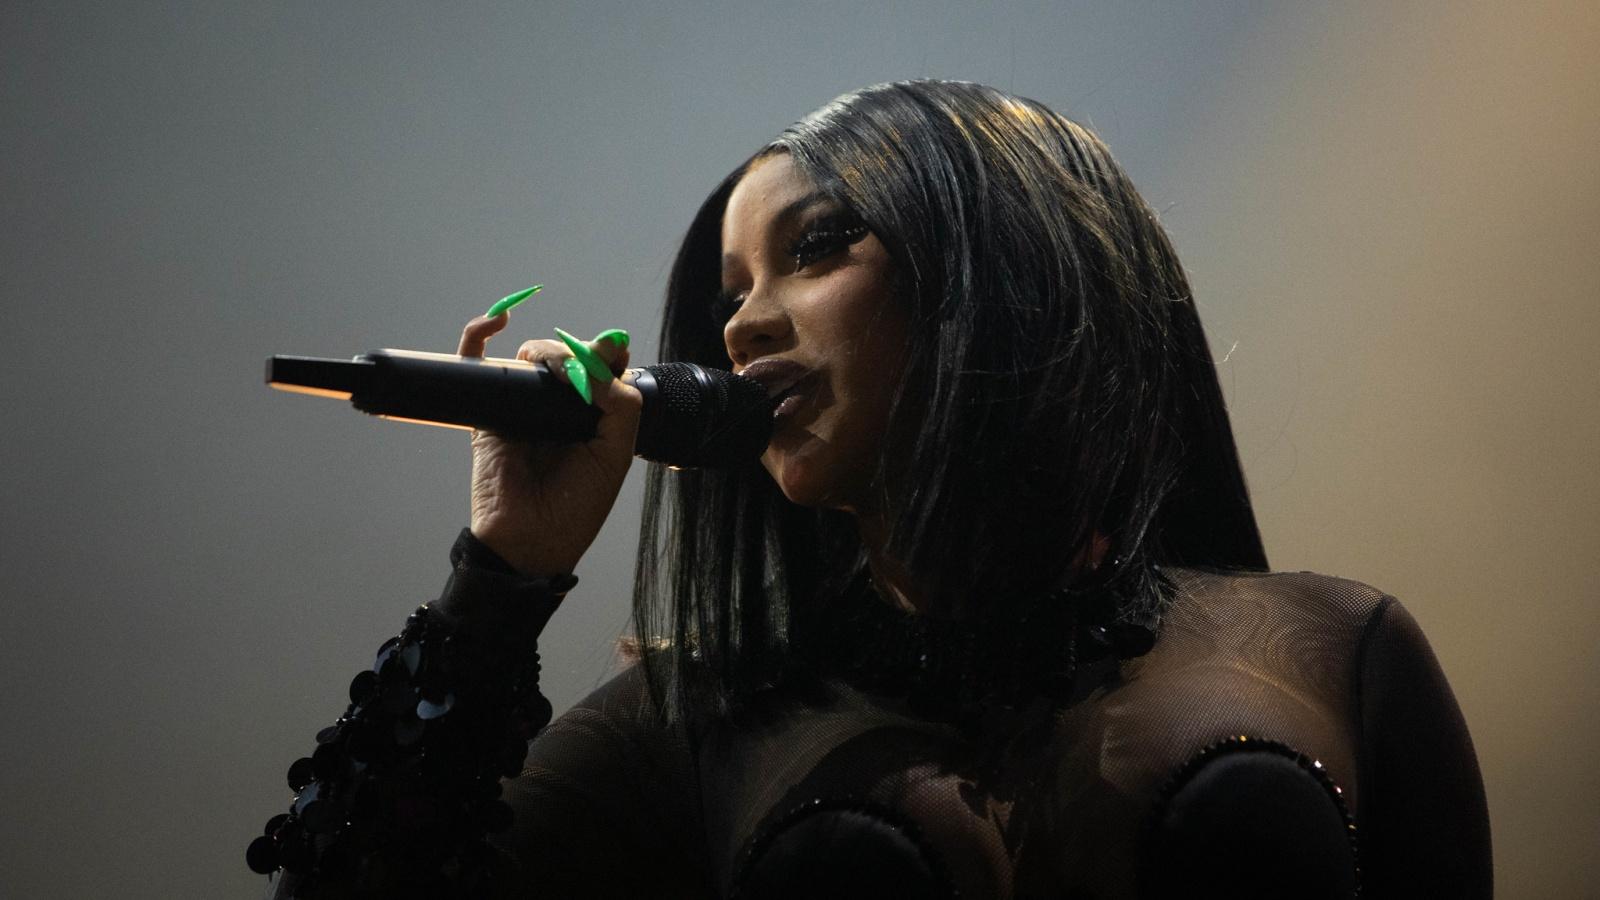 Cardi B performing onstage at a festival concert